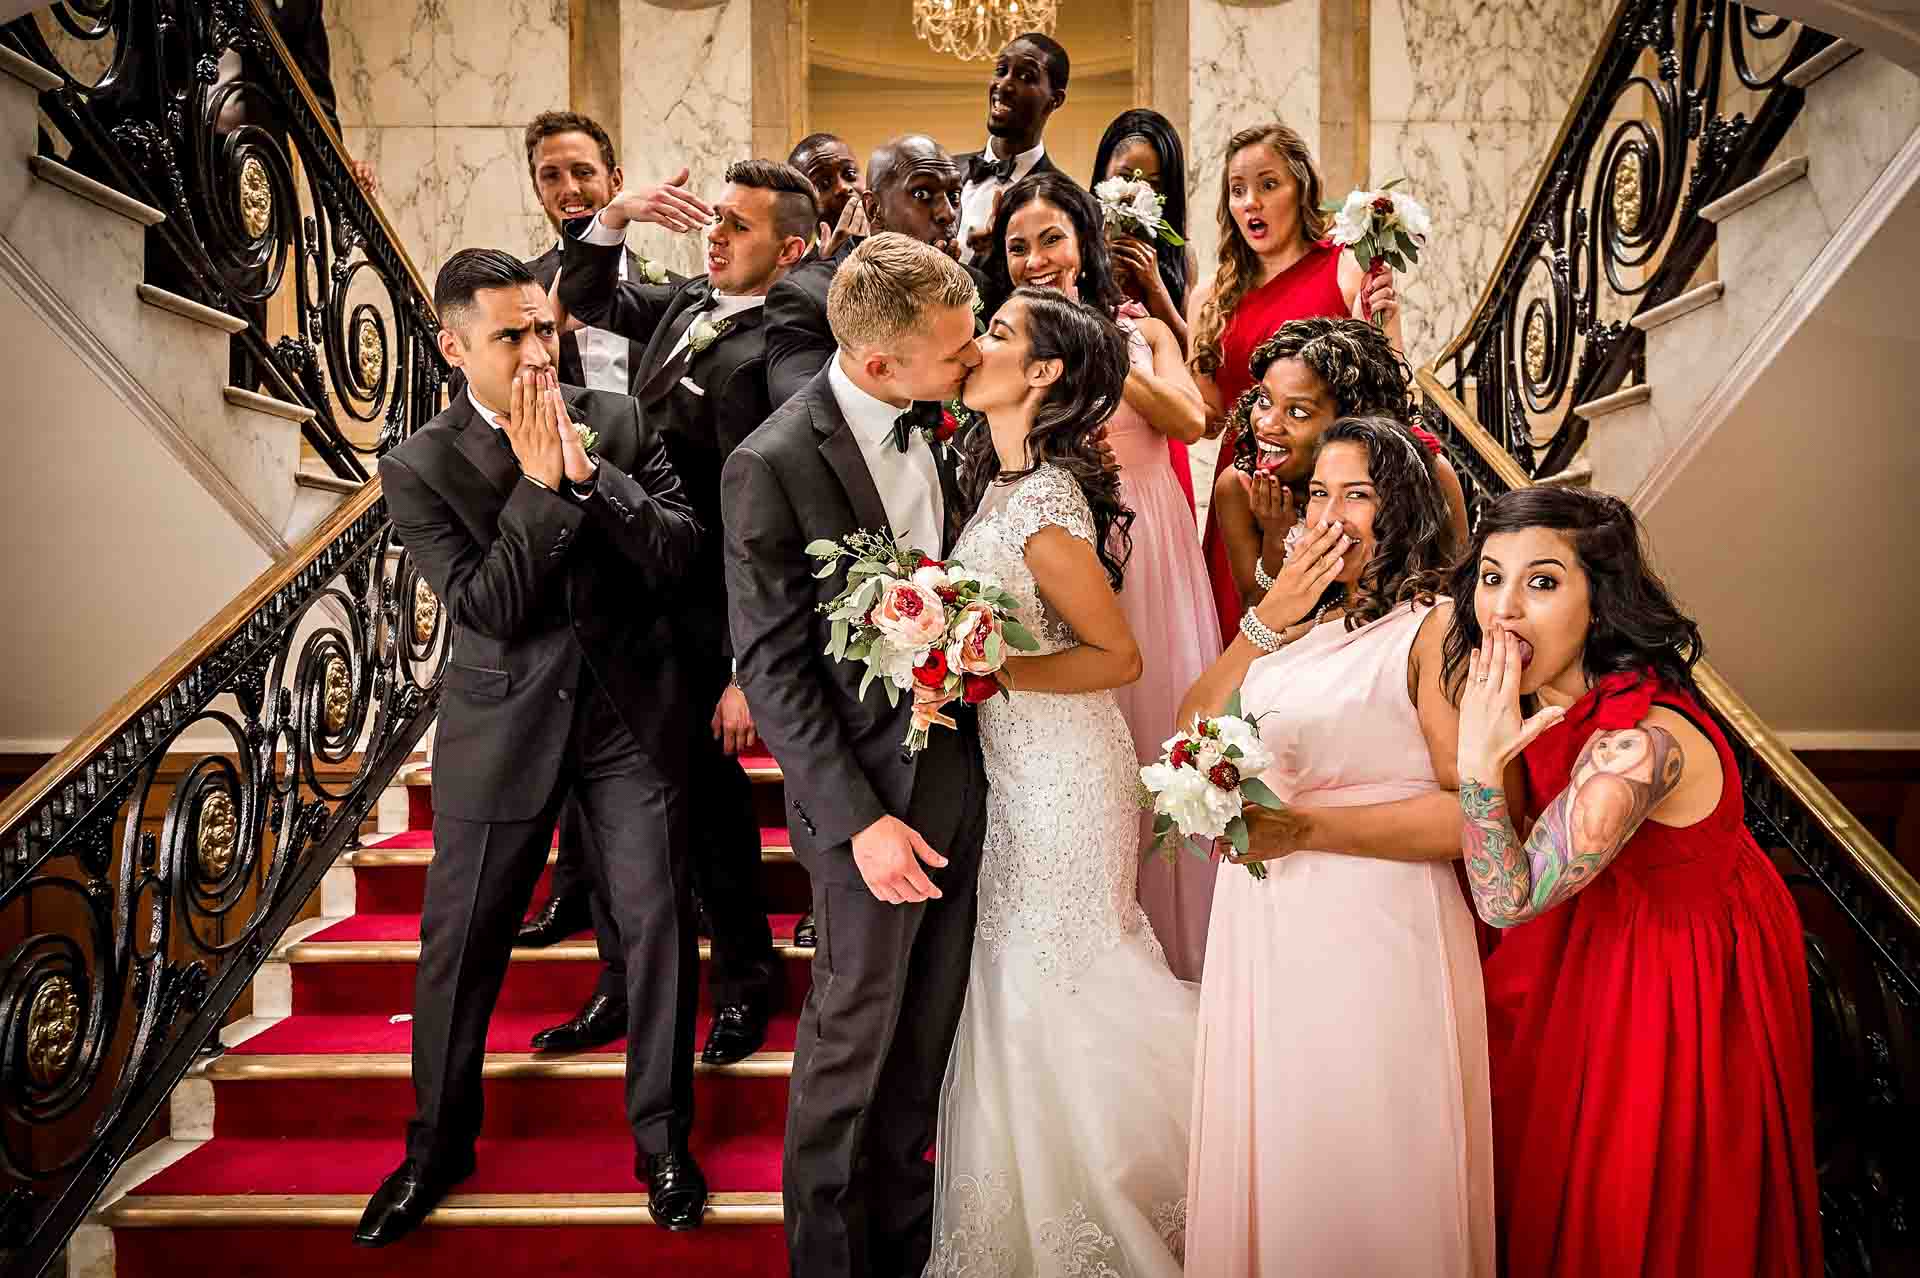 Bride and Groom Kissing with Other Guests Watching Horrified